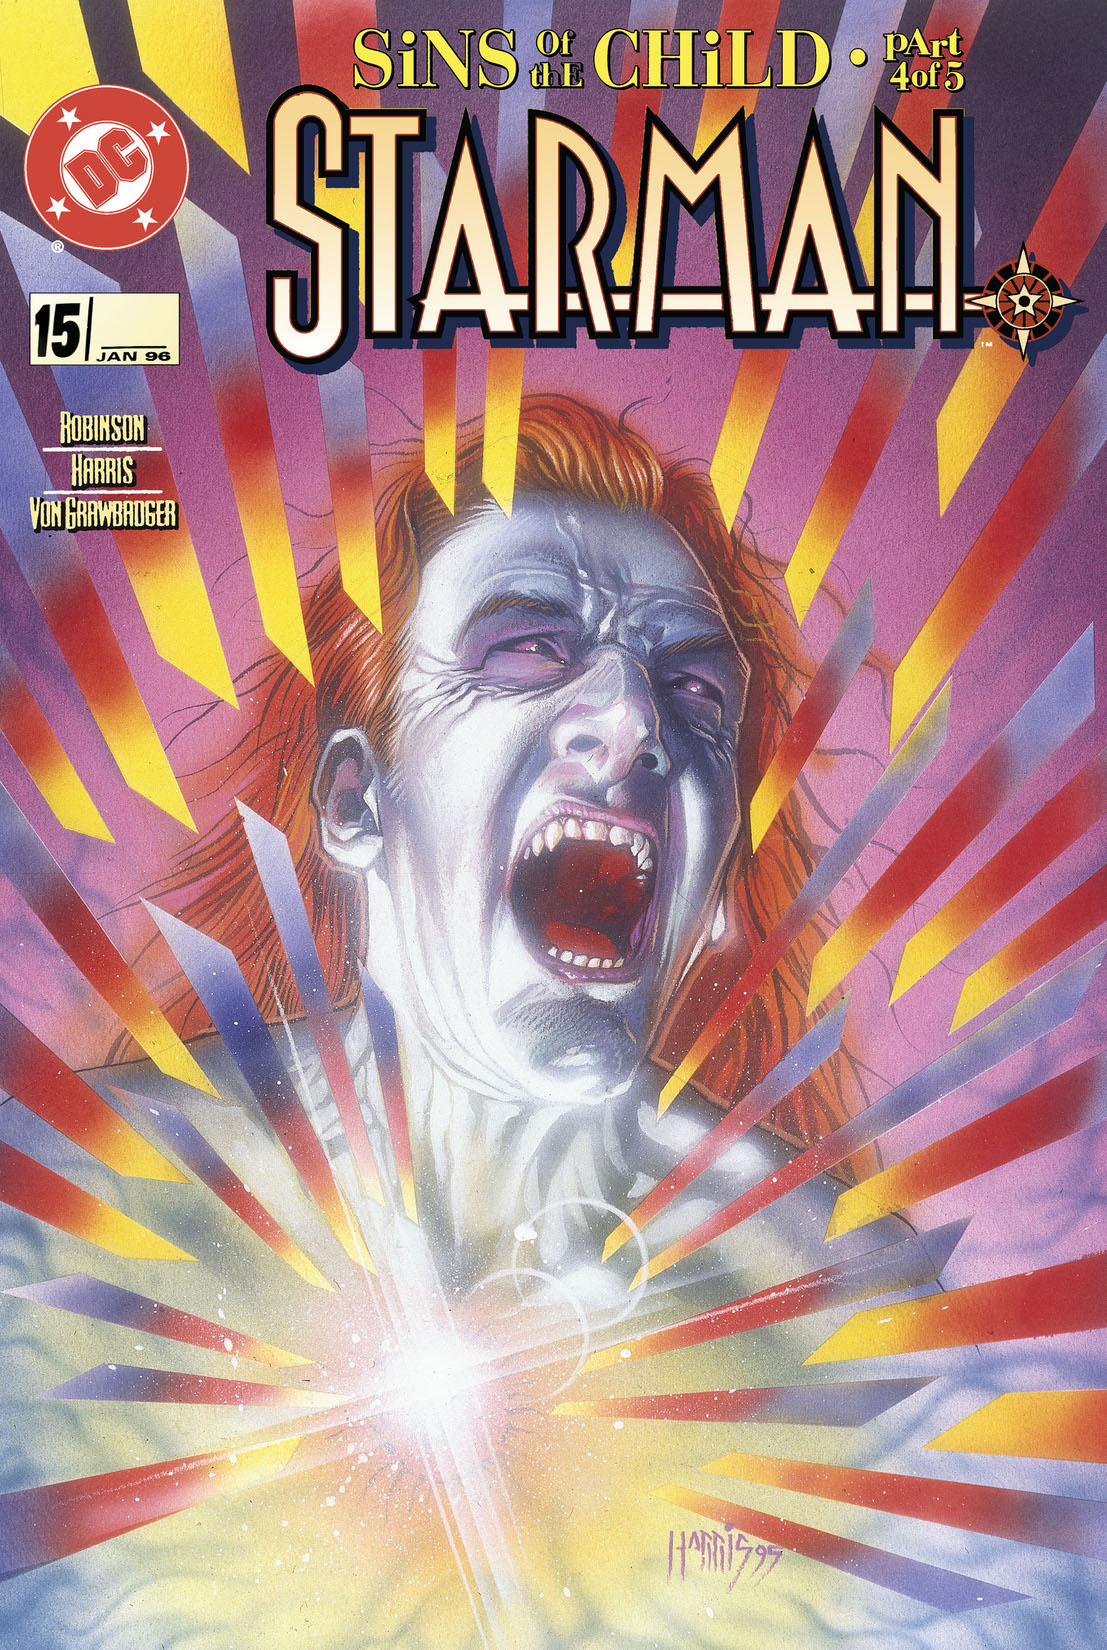 Starman (1994-) #15 preview images